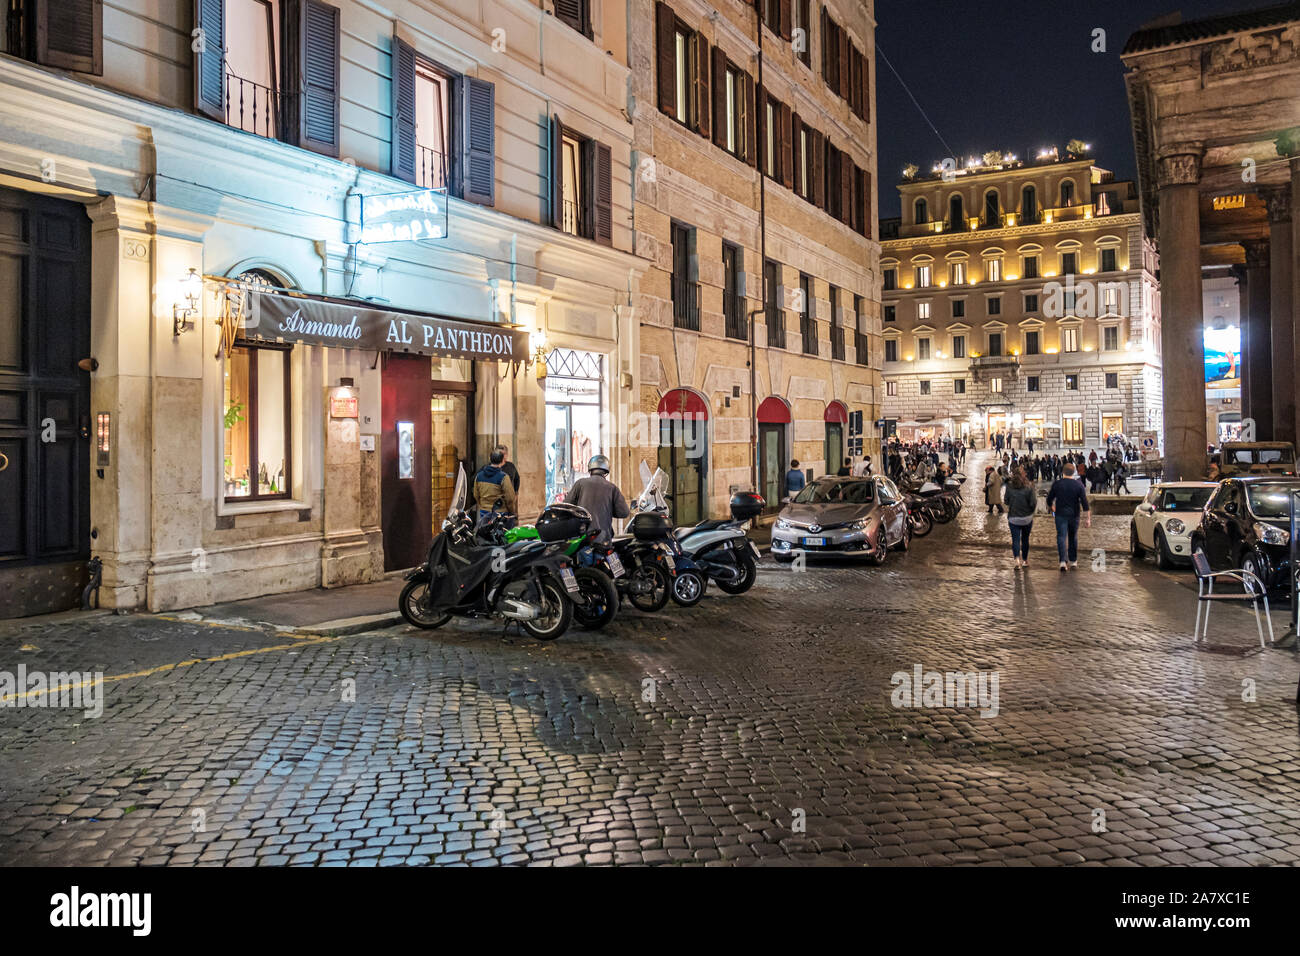 Outside view of Armando al Pantheon restaurant at night, Rome, Italy Stock Photo